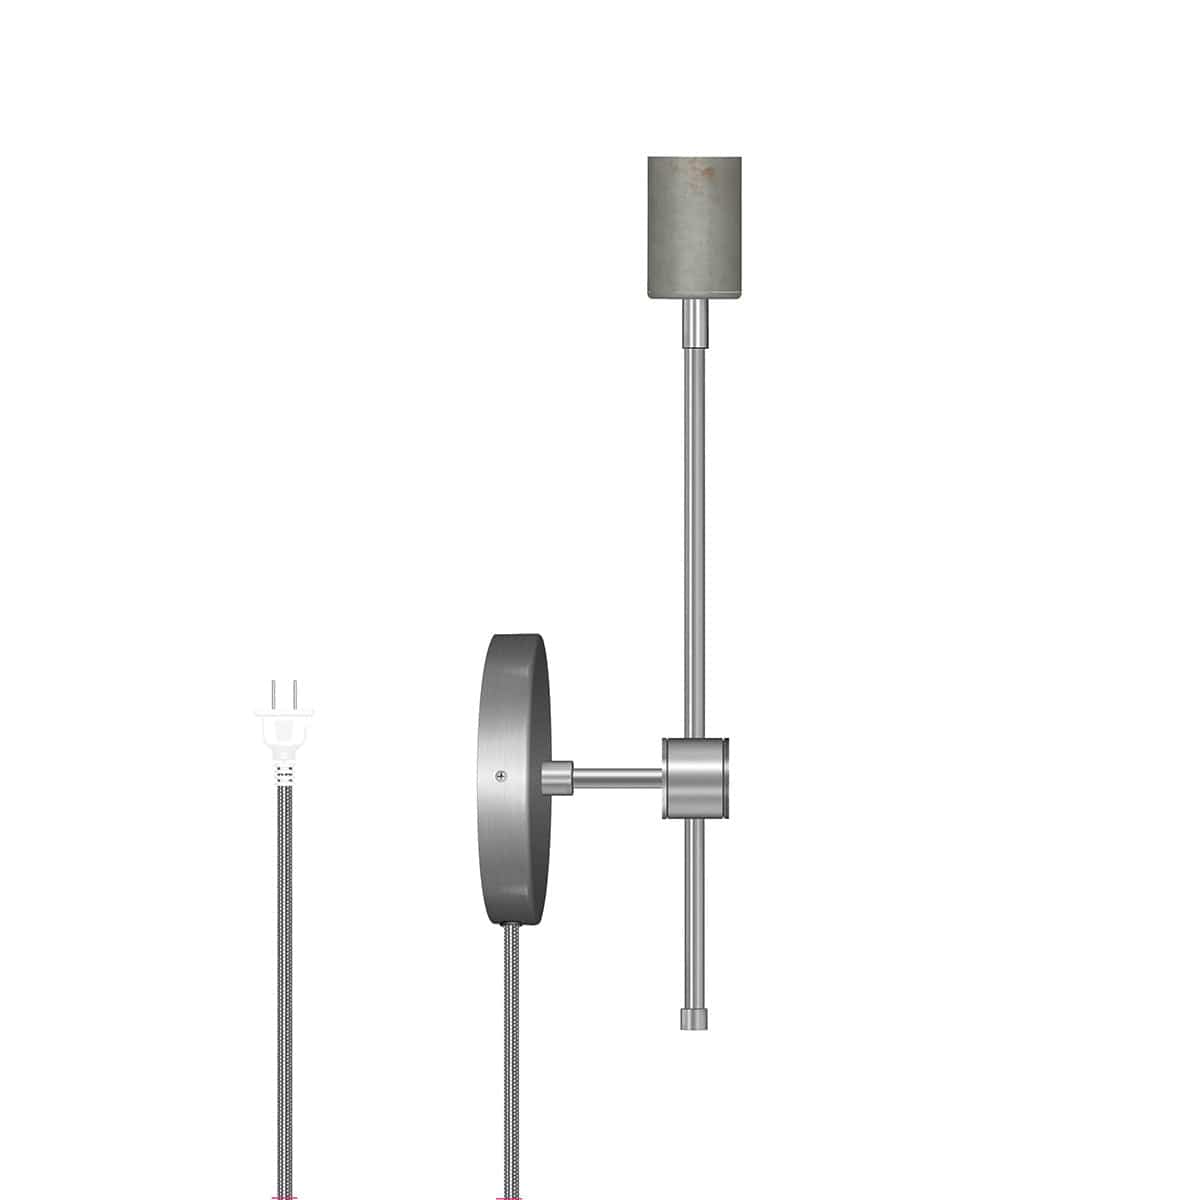 Solo Plug-In Sconce